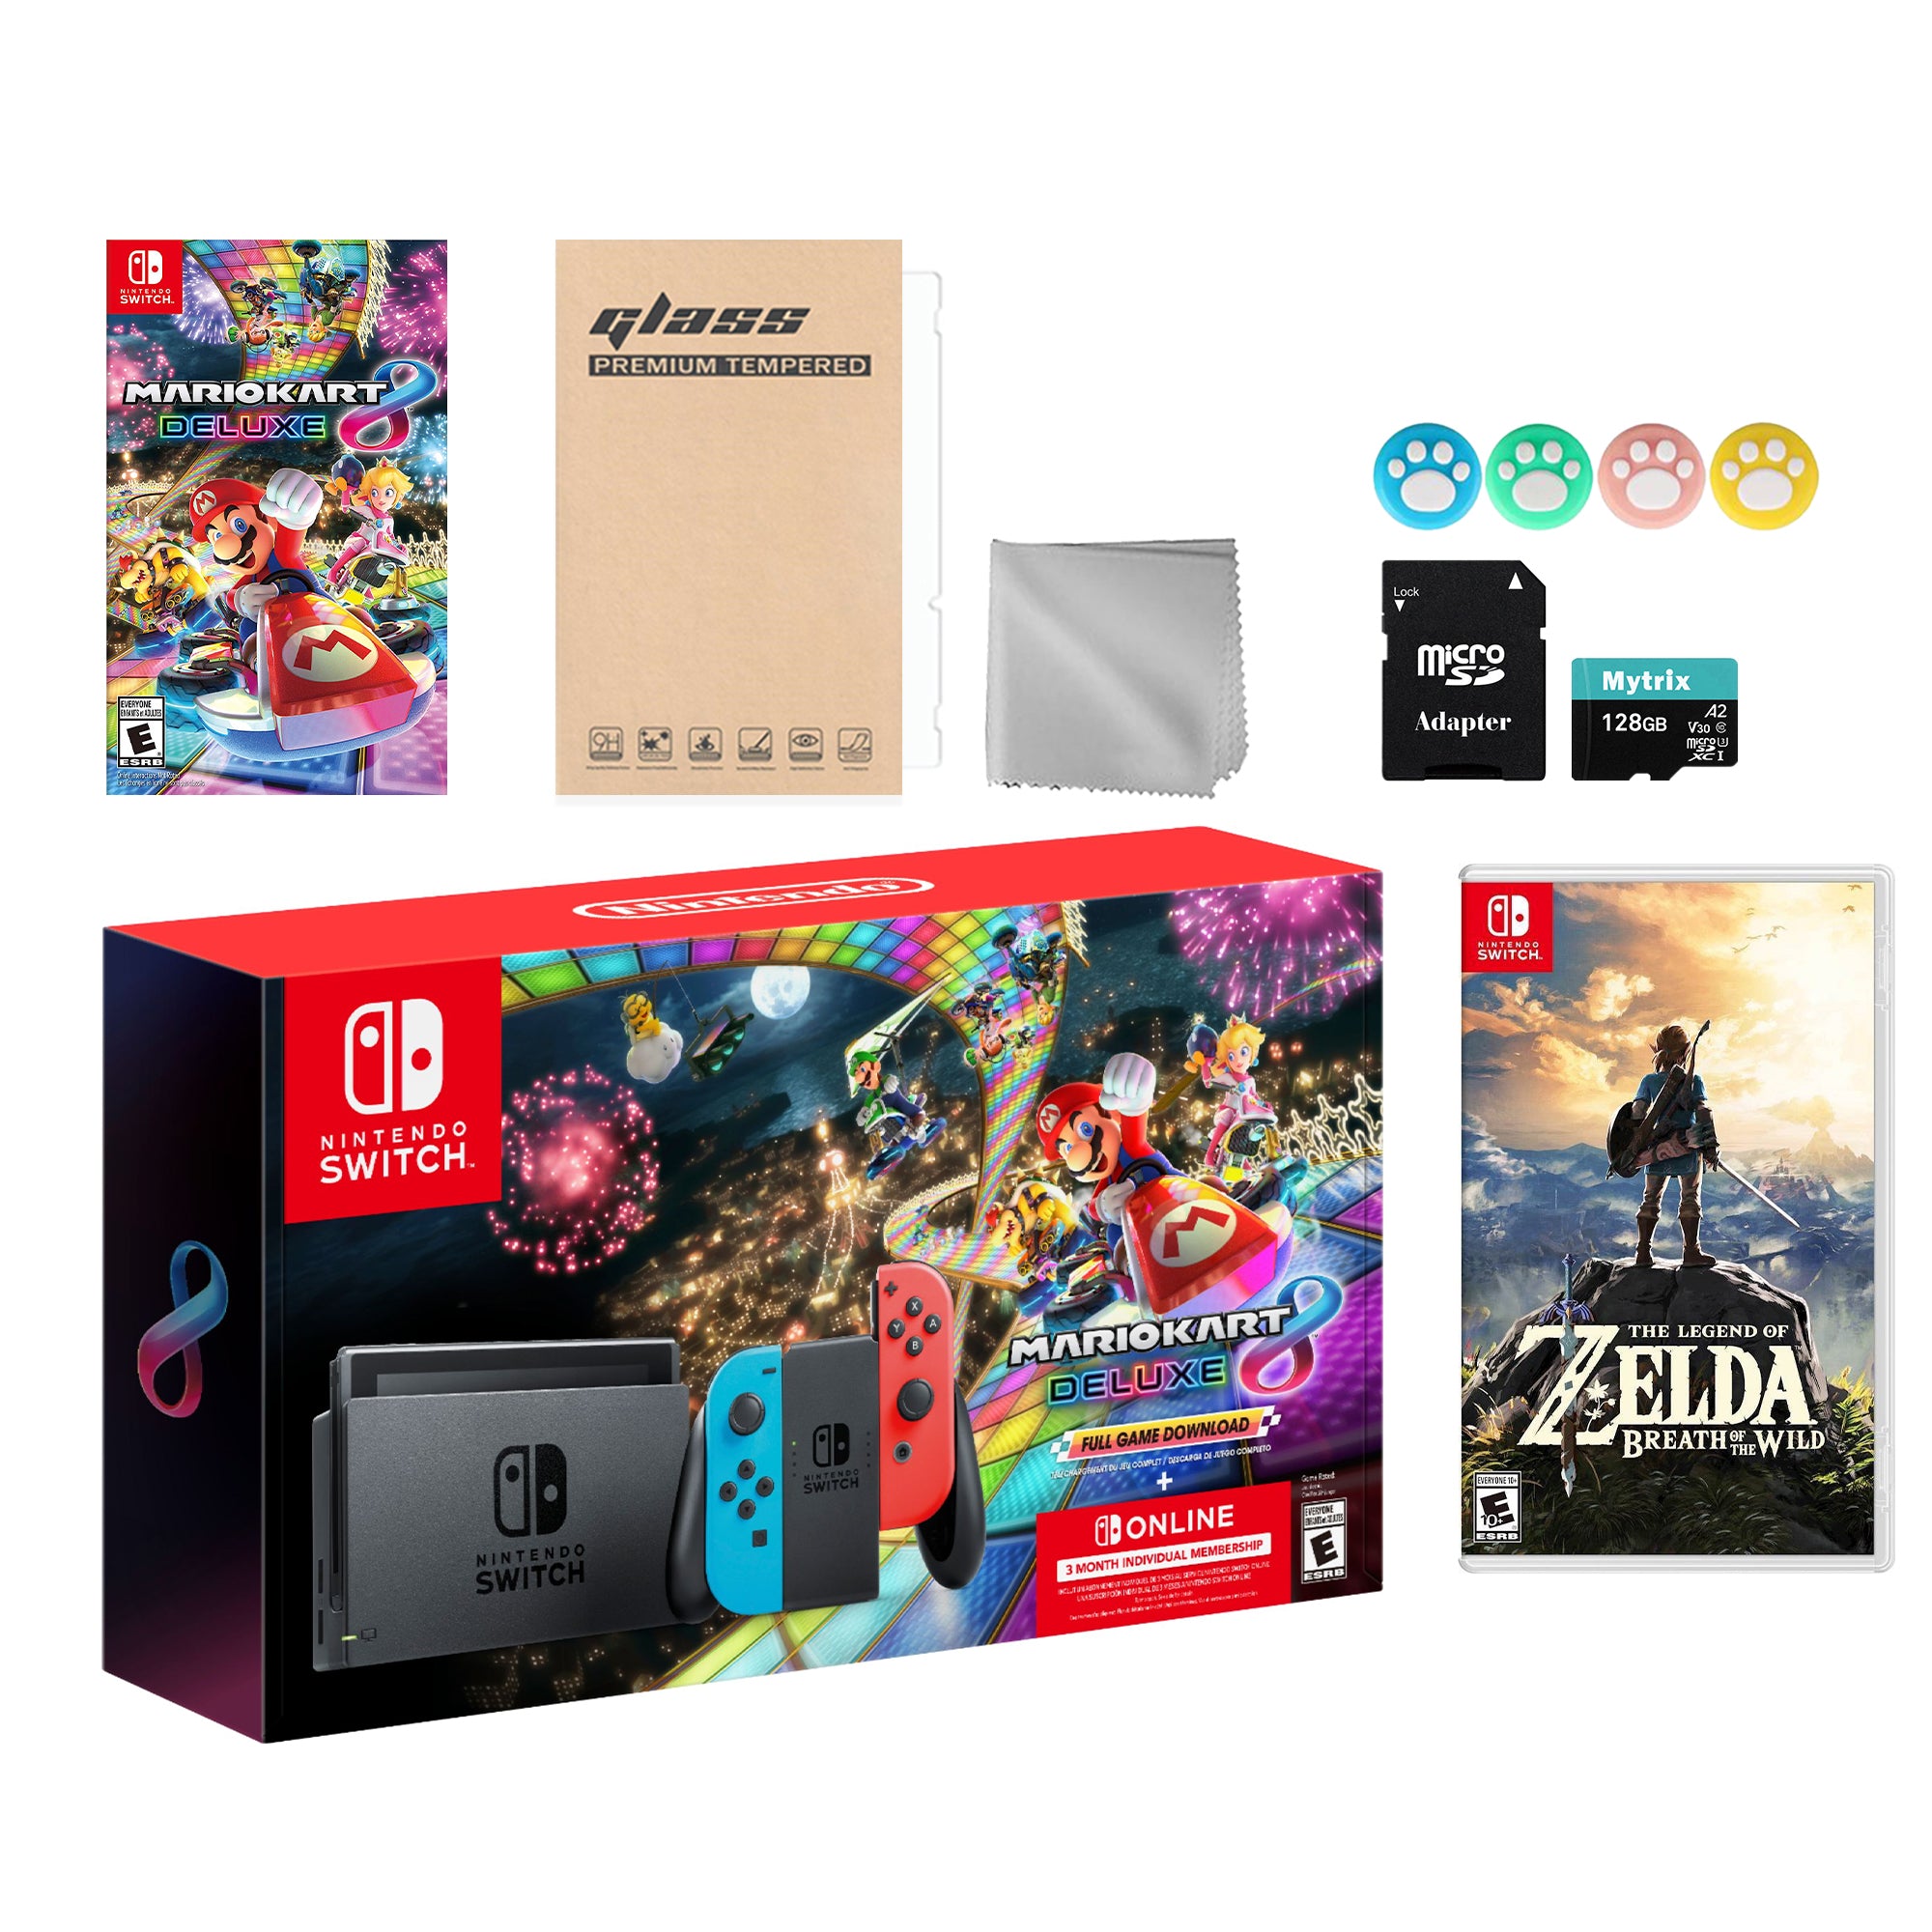 Nintendo Switch Mario Kart 8 Deluxe Bundle: Red Blue Console, Mario Kart 8 & Membership, The Legend of Zelda: Breath of the Wild, Mytrix 128GB MicroSD Card and Accessories